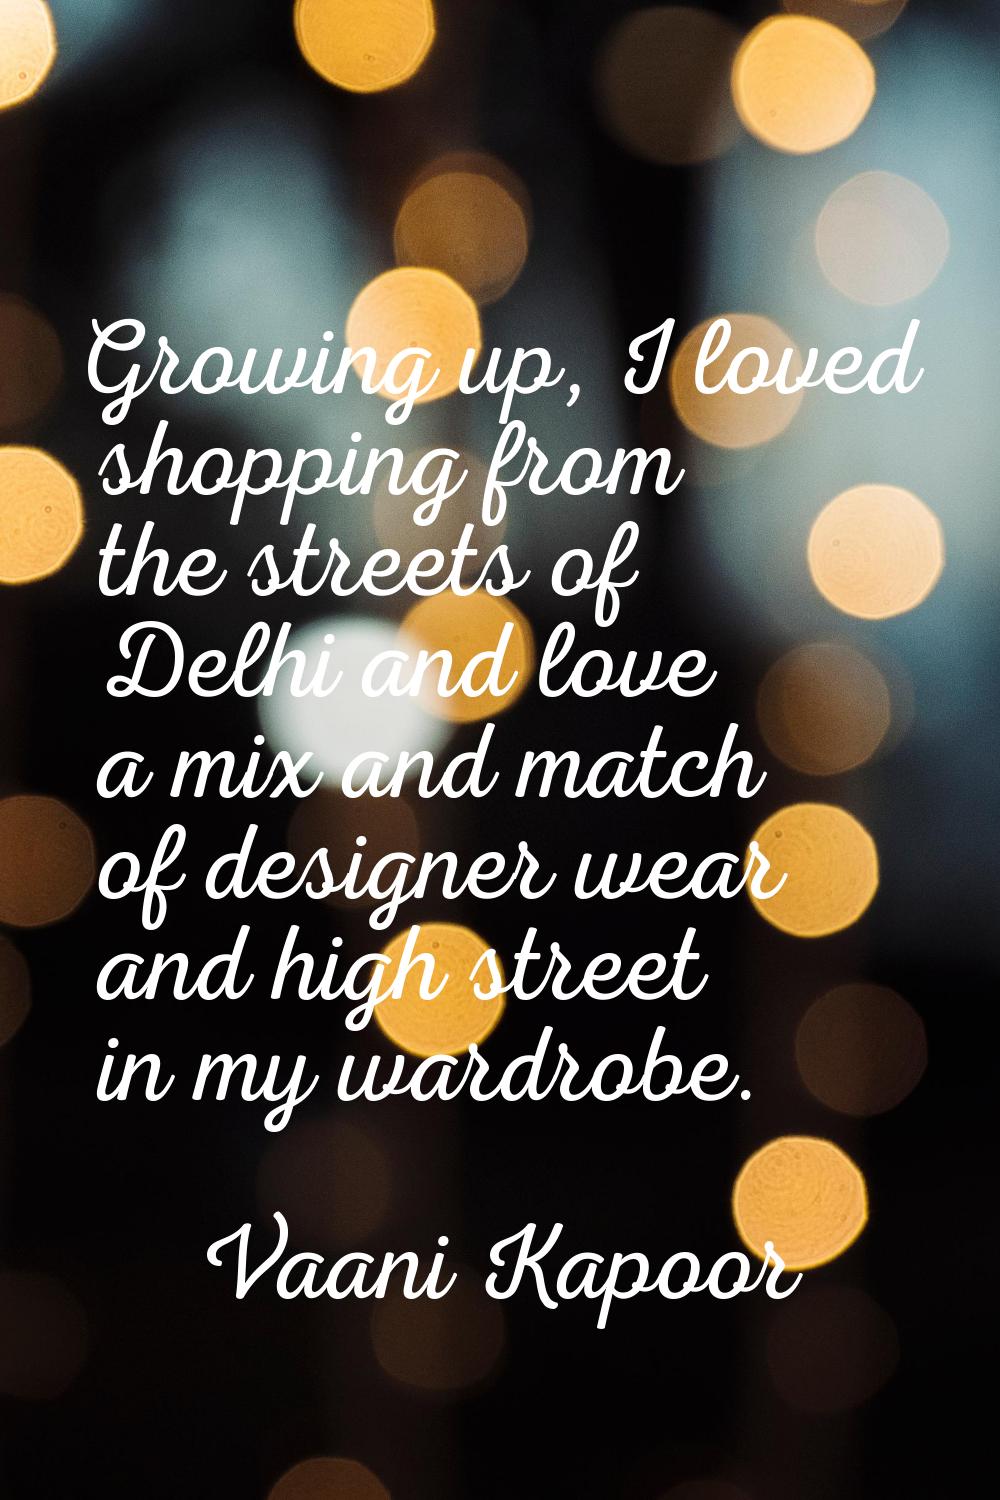 Growing up, I loved shopping from the streets of Delhi and love a mix and match of designer wear an